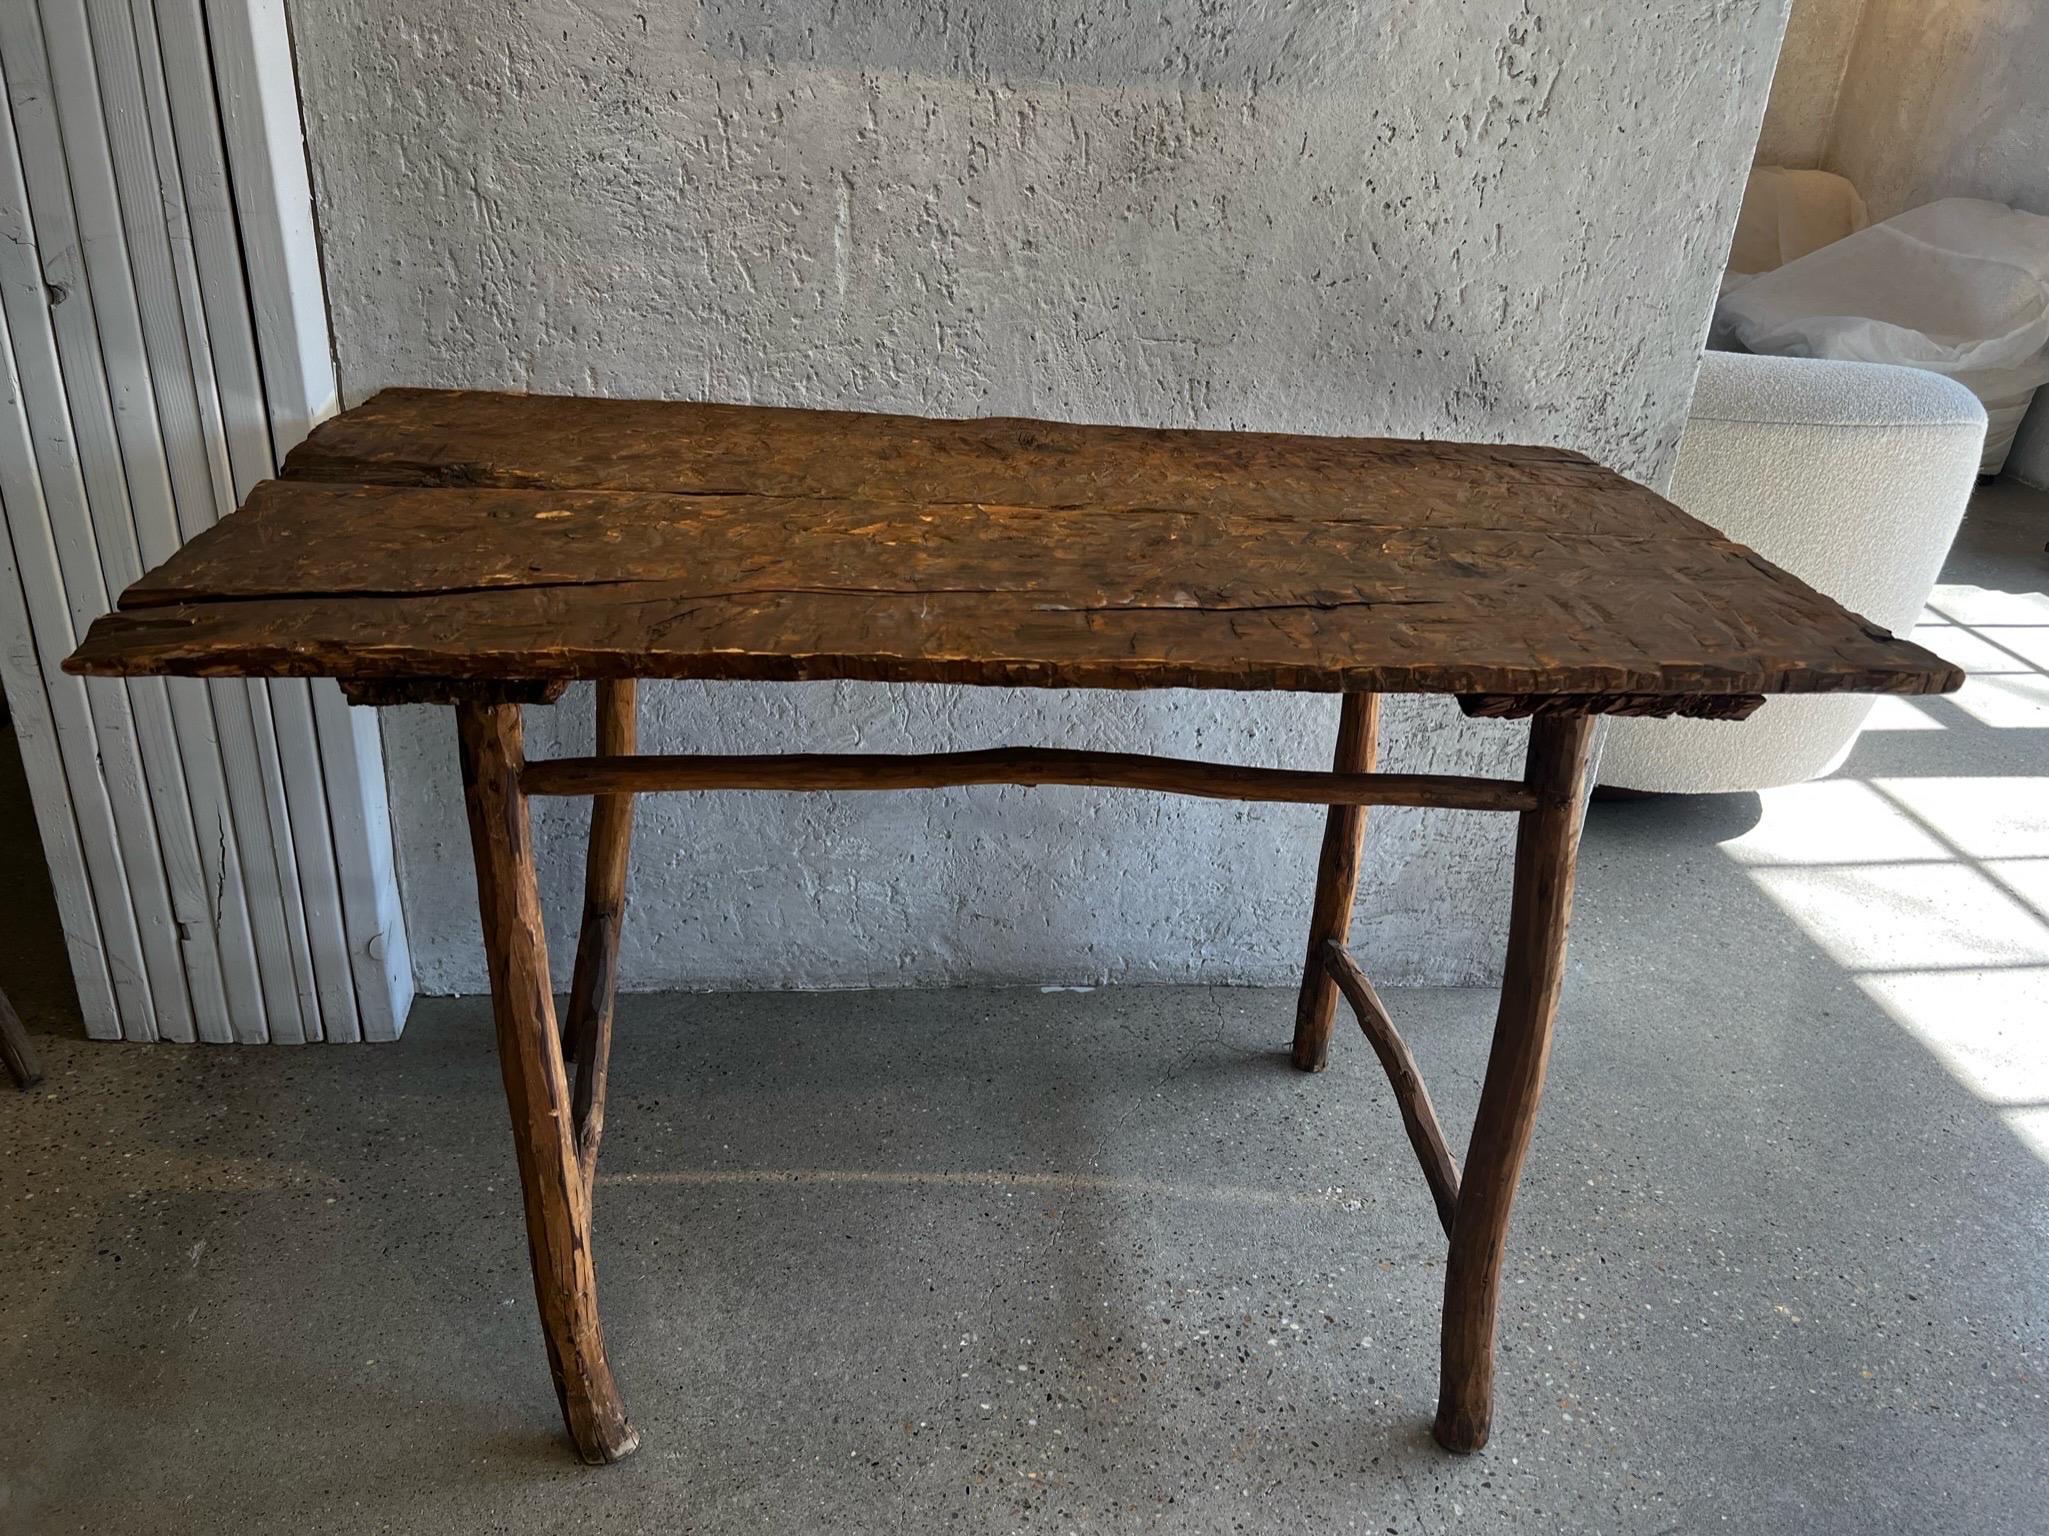 This is an authentic 18th century farm table. Every inch is as it has been for centuries. Elegant and boney its a beautiful piece in any setting.